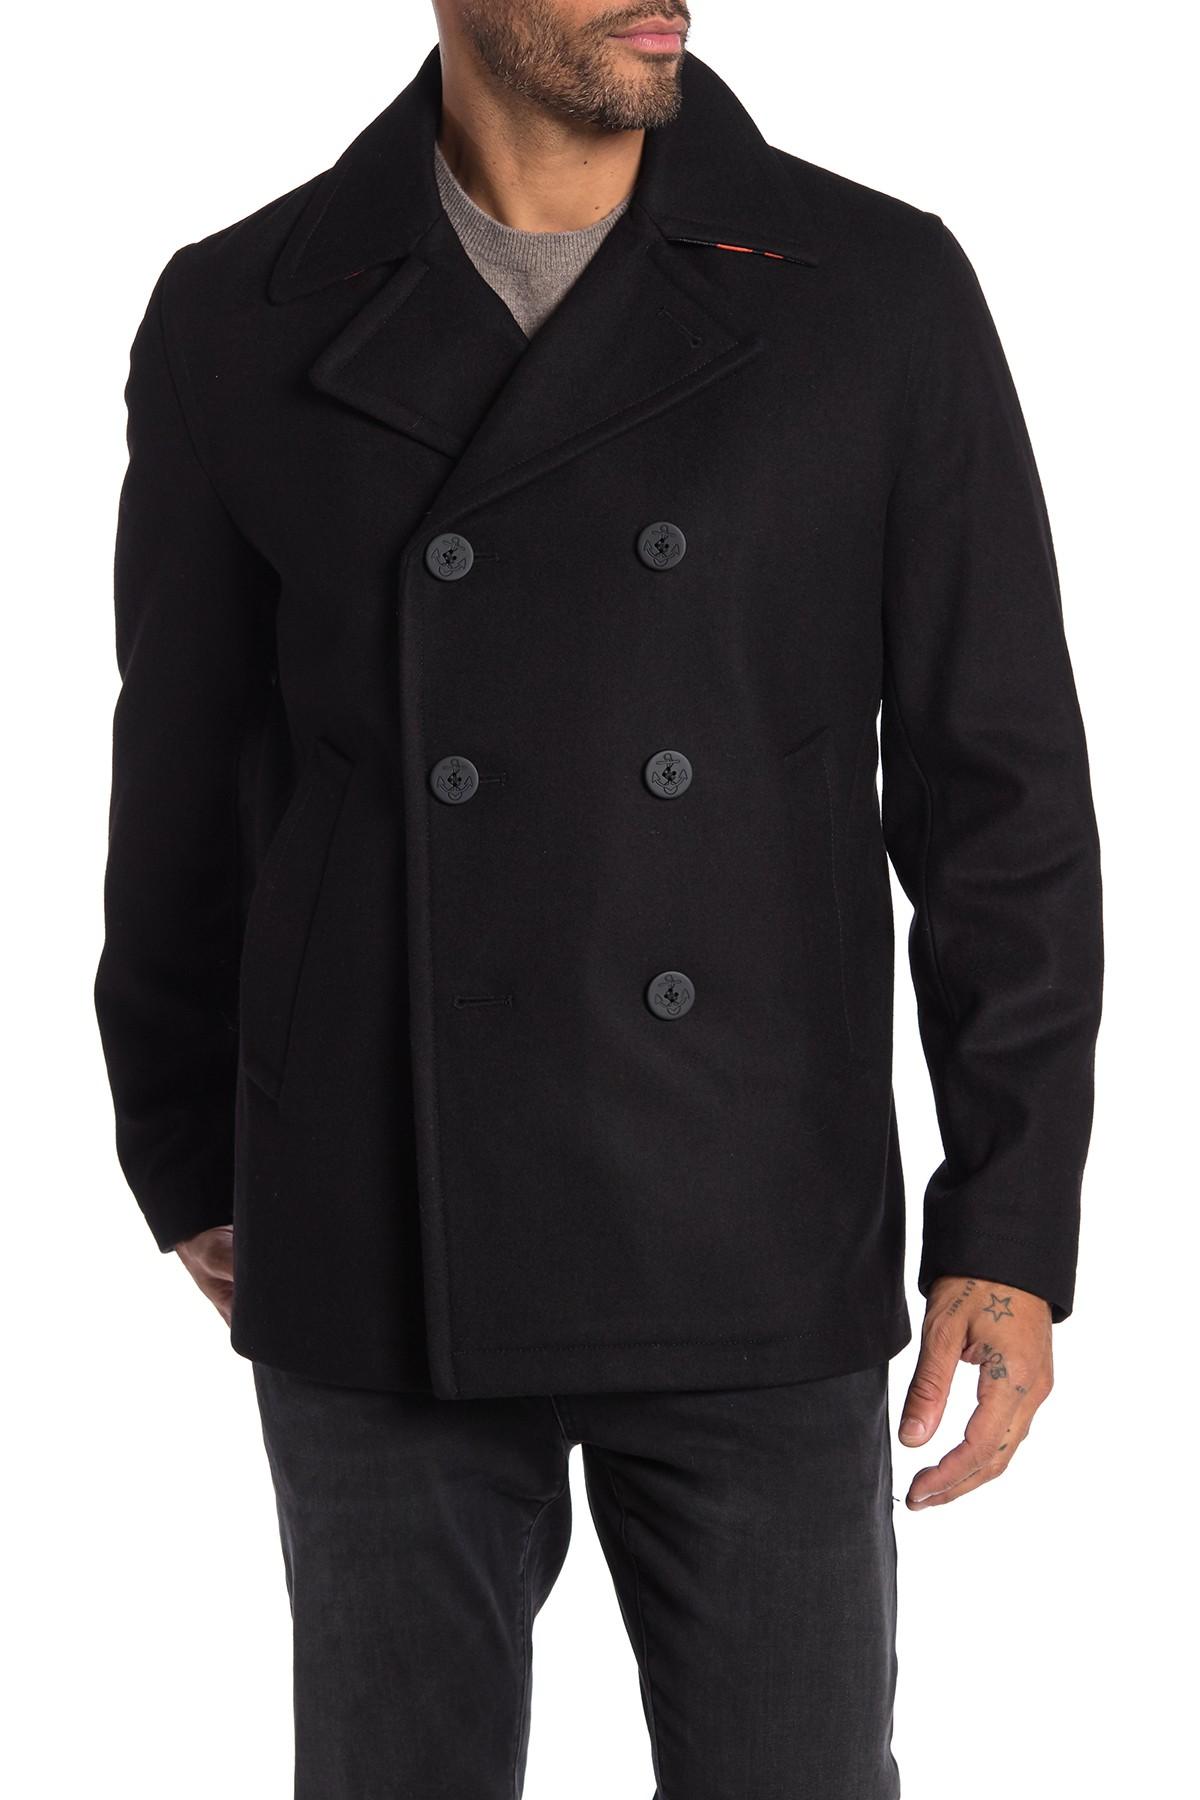 Michael Kors Wool Meredith Heavy Double-breasted Pea Coat in Black for ...